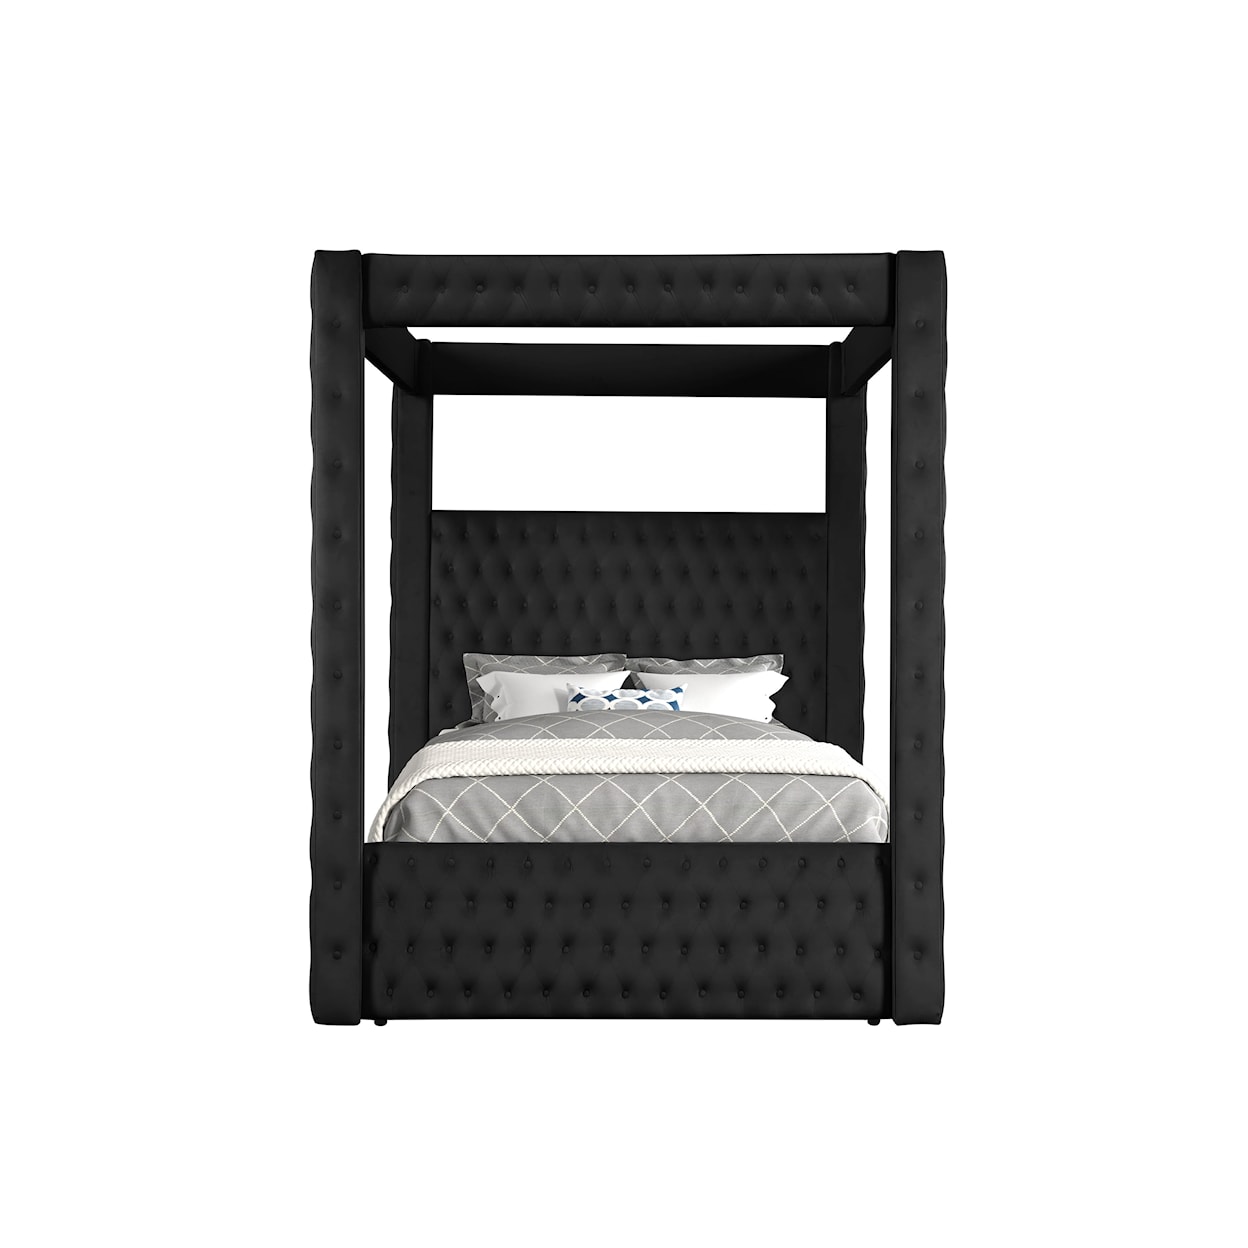 CM ANNABELLE Queen Canopy Bed - Black